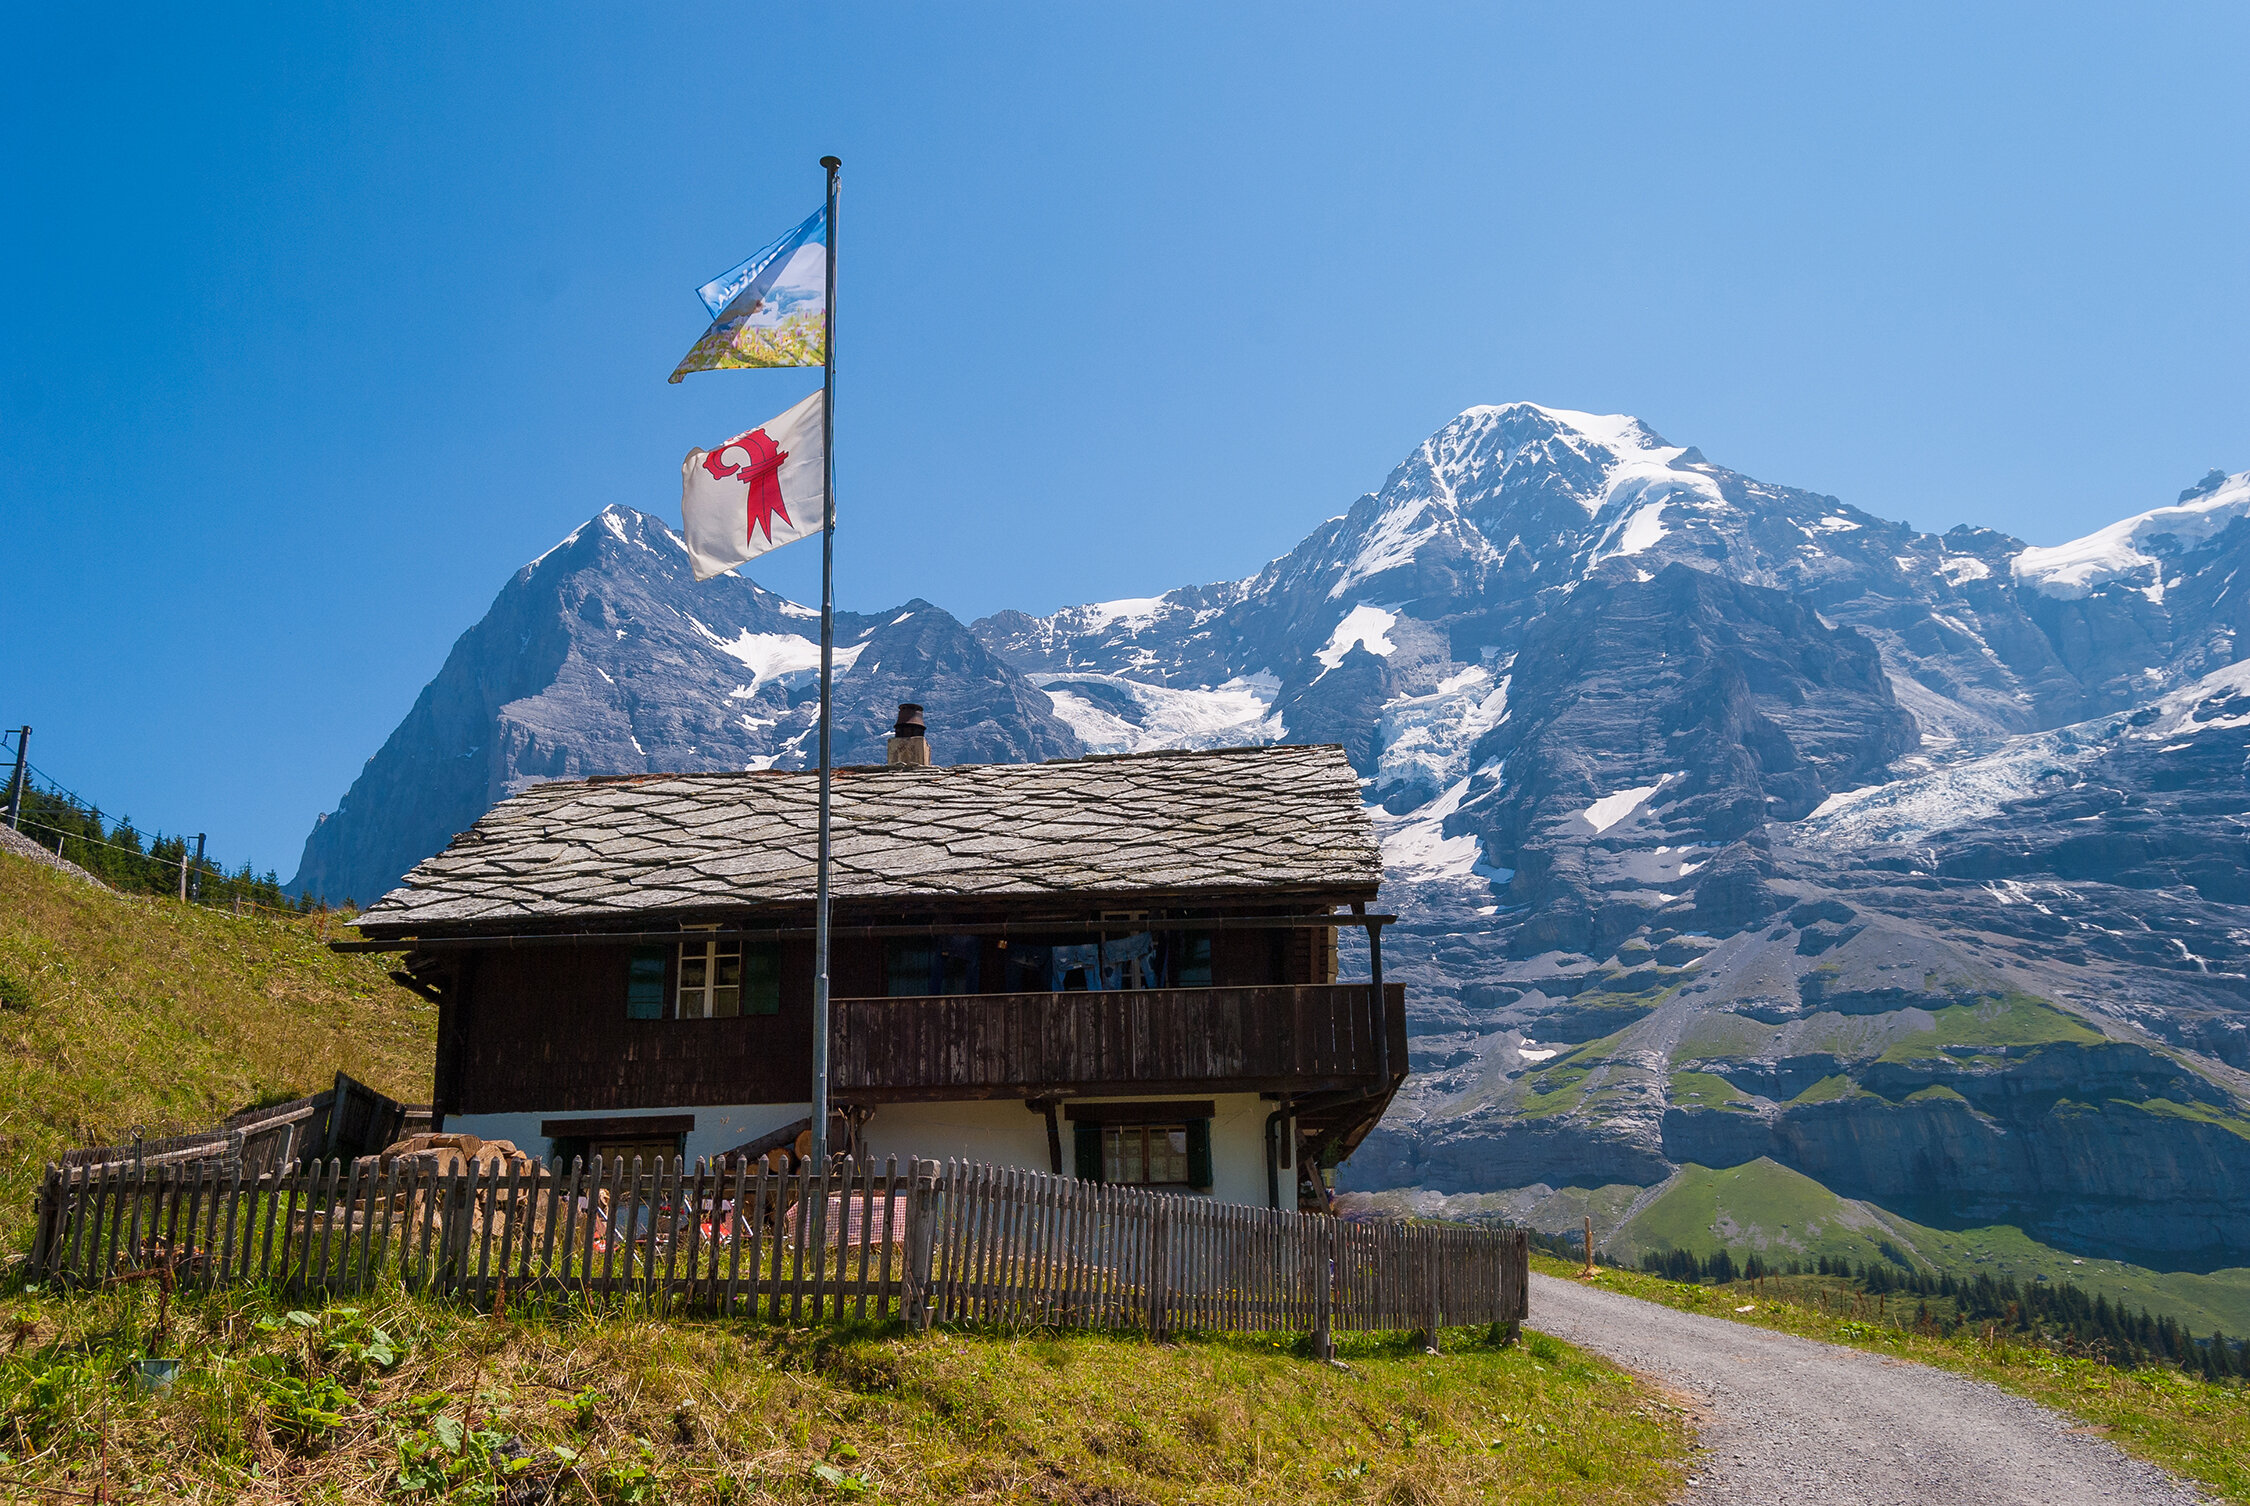  A Swiss chalet at Wengernalp with the Eiger and Mönch in the background—Berner Oberland.  